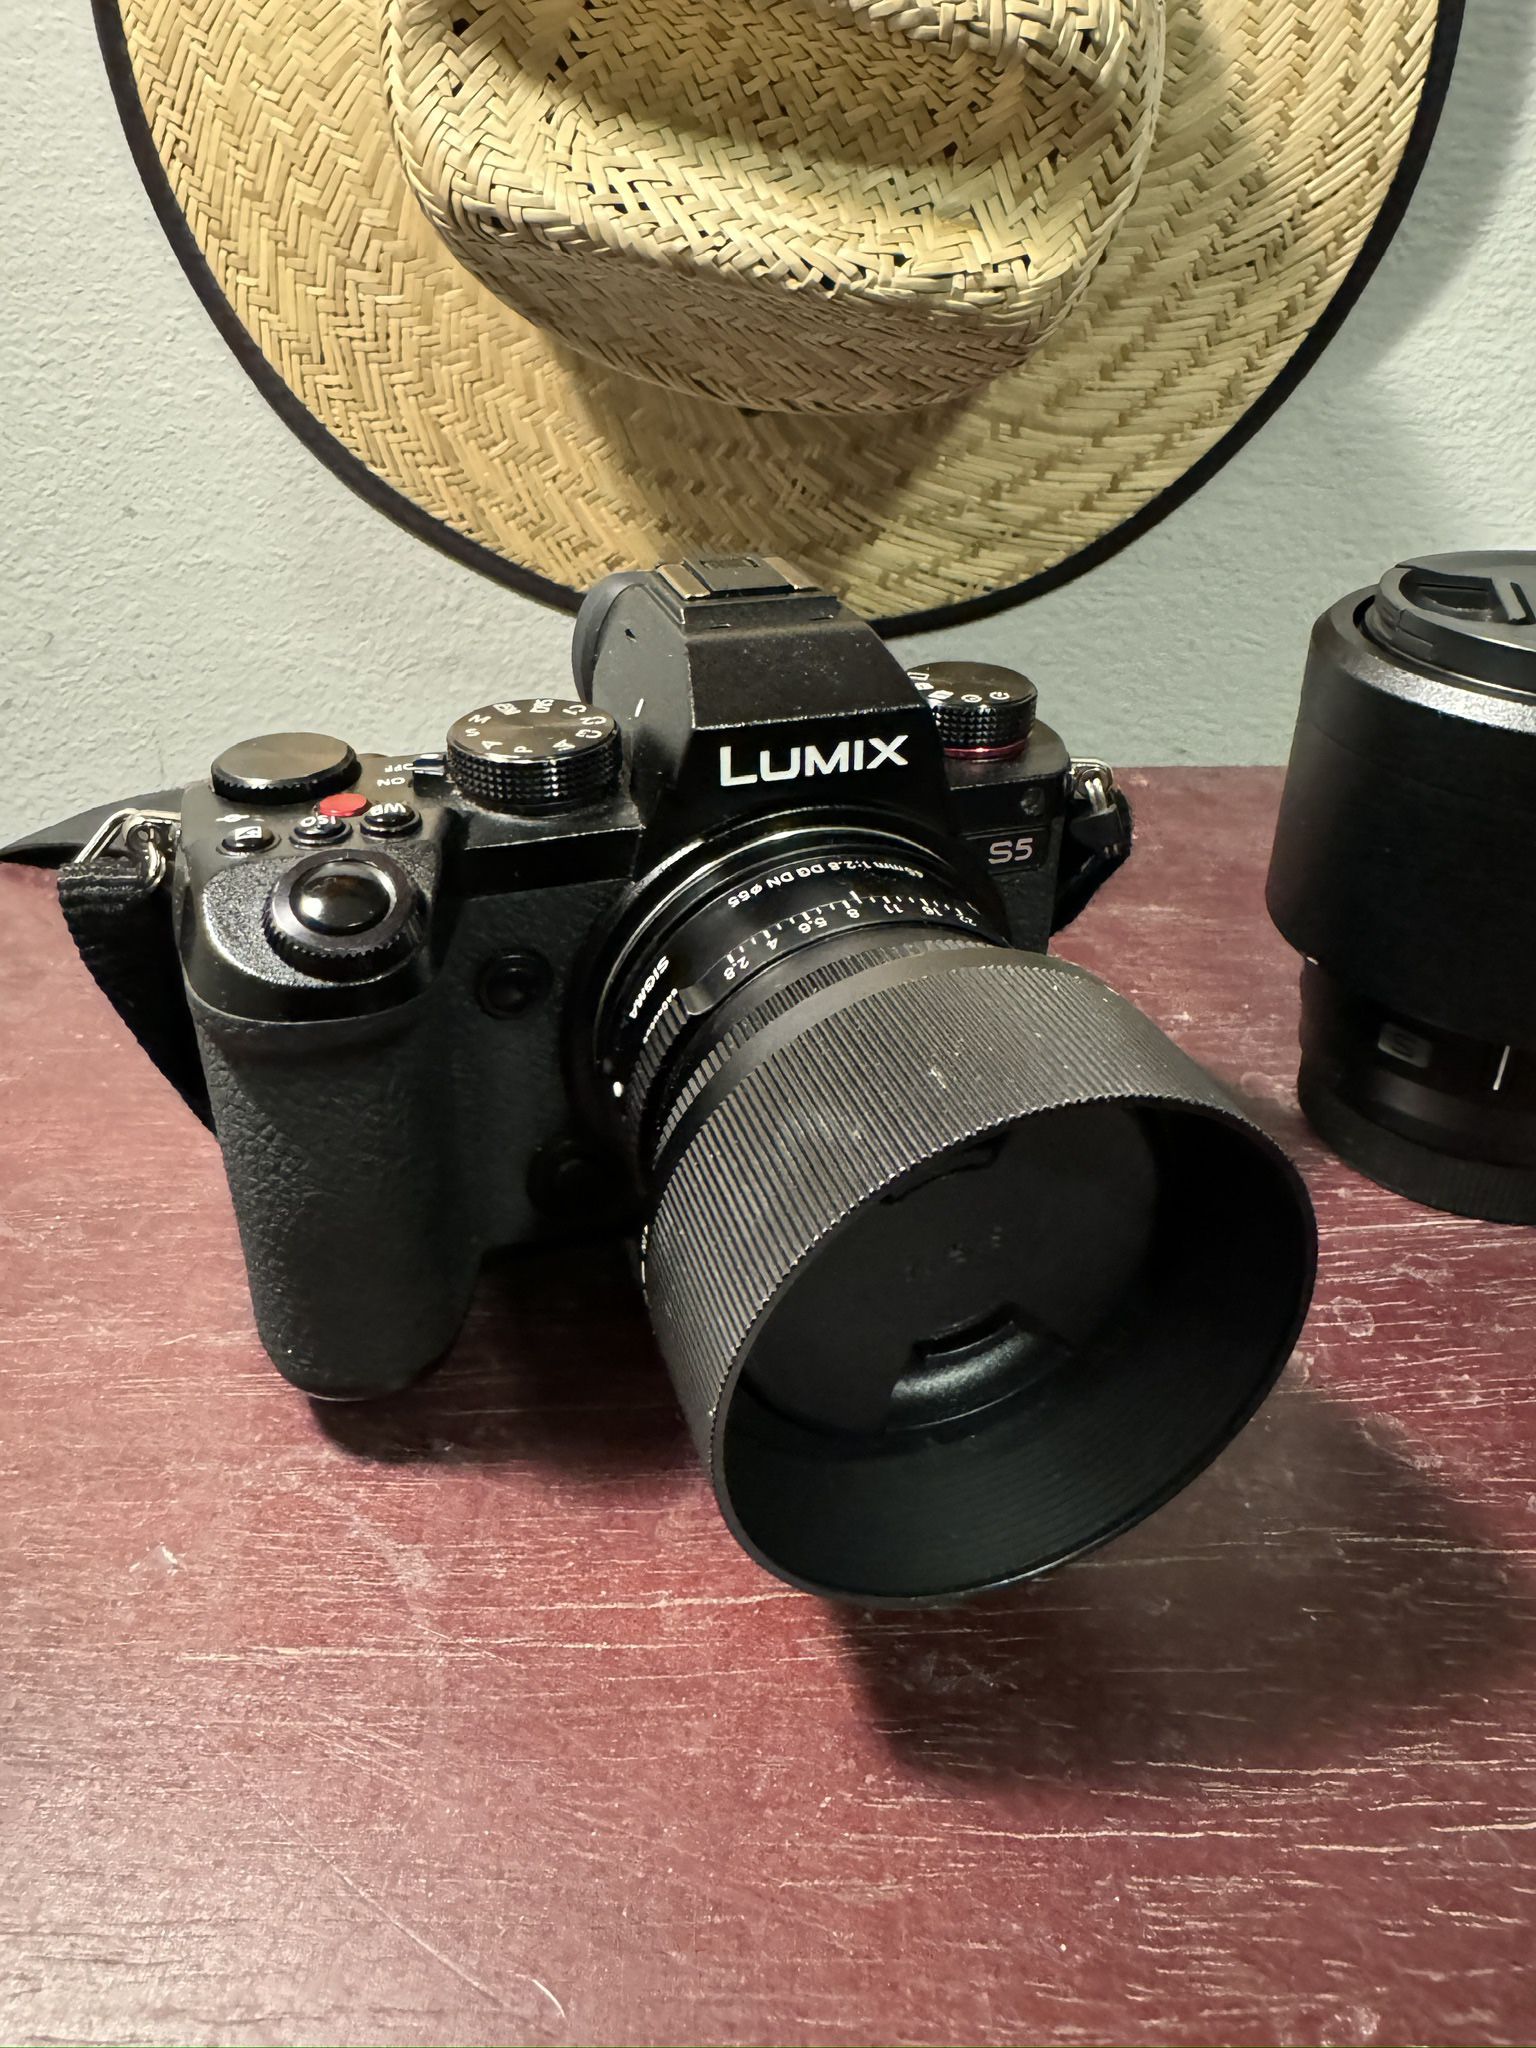 Lumix S5 And 3 Lenses. For Sale Or Trade 